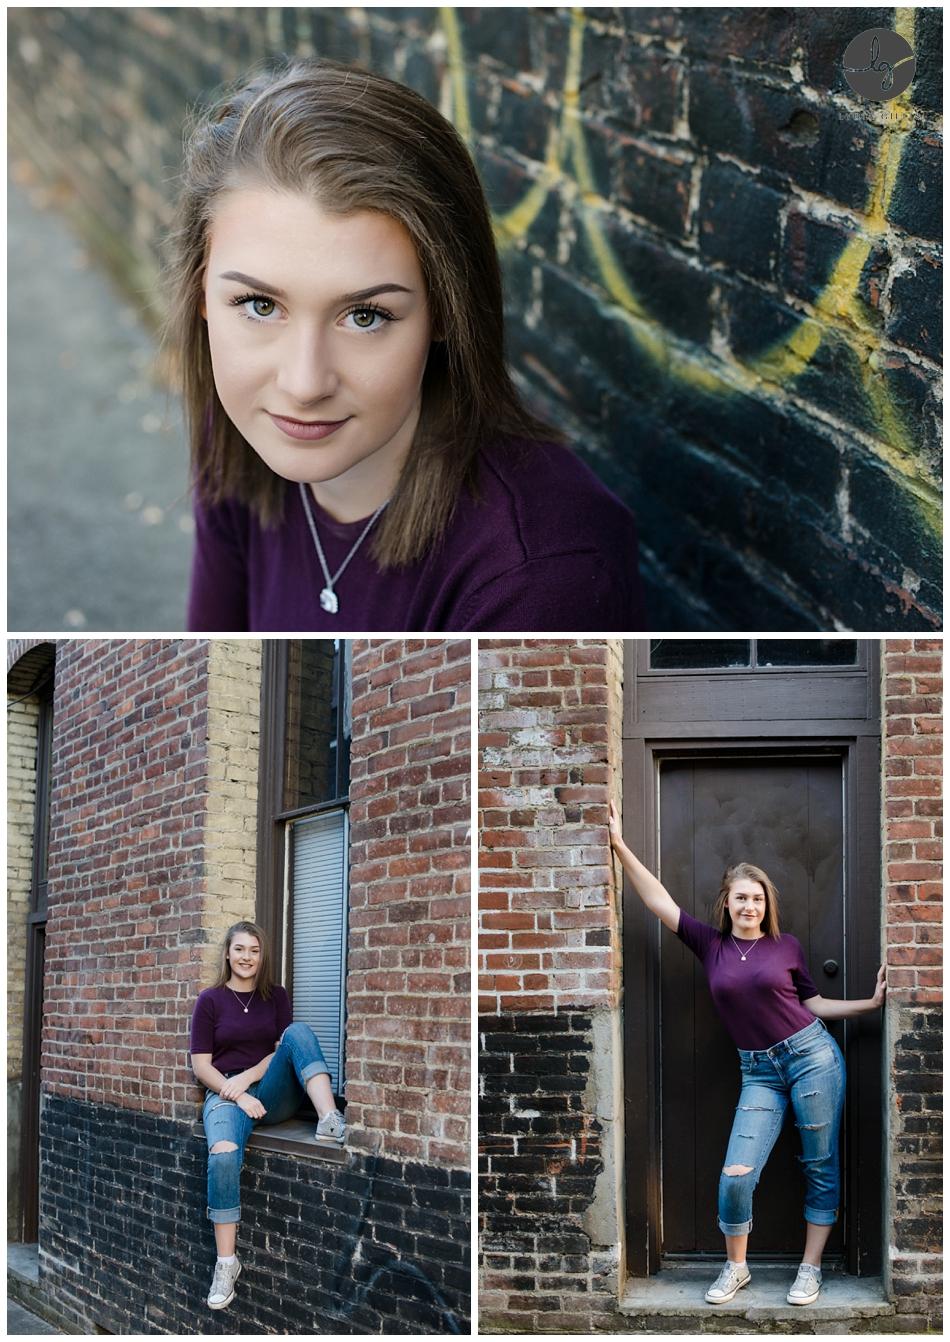 Urban senior pictures in downtown Eugene